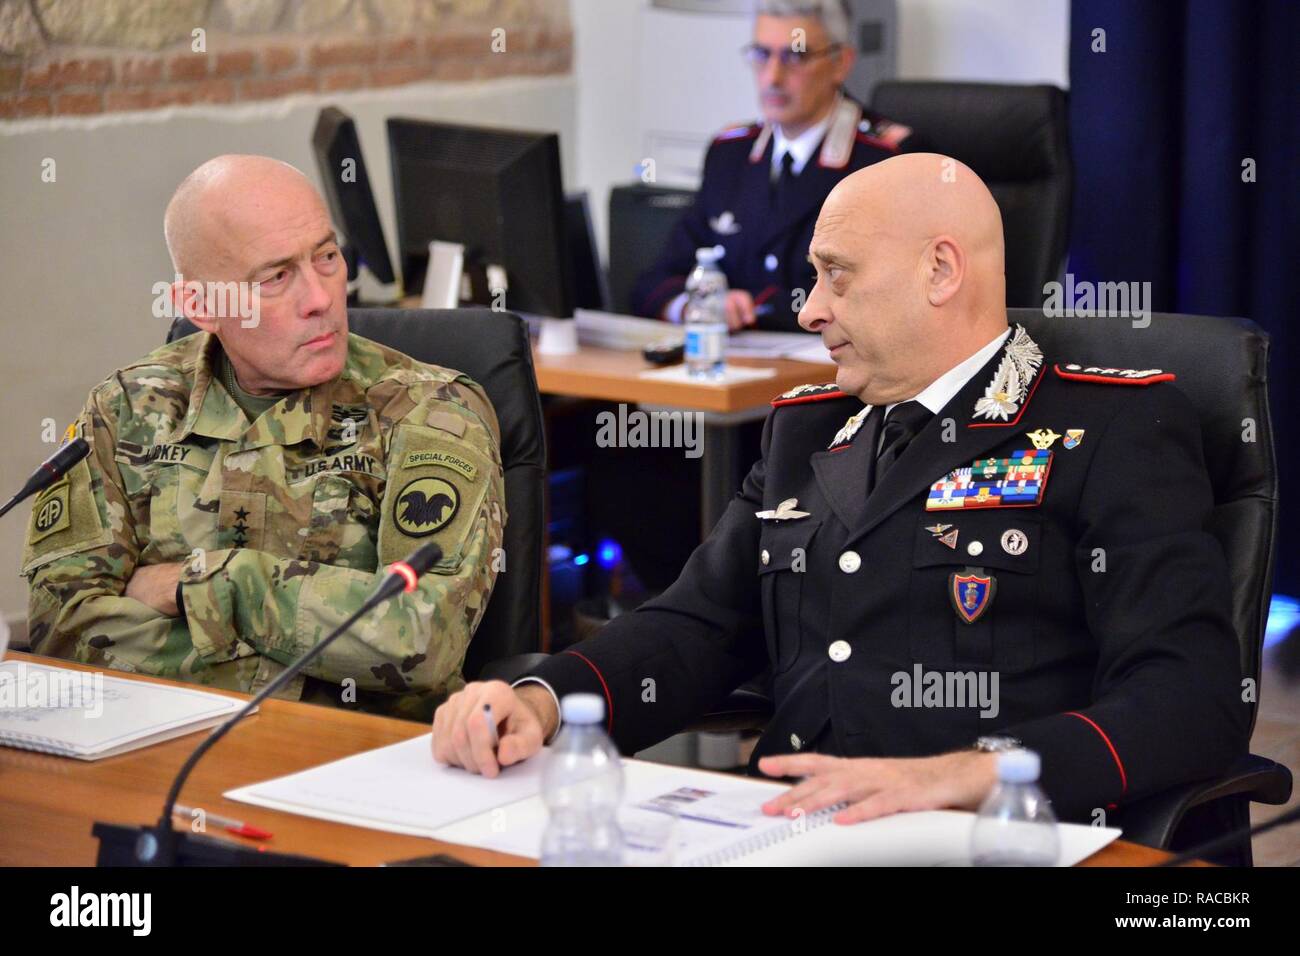 Lt. Gen Vincenzo Coppola (left), Commanding General “Palidoro” Carabinieri Specialized and Mobile Units, talk with Lt. Gen. Charles D. Luckey (left), Commanding General U.S. Army Reserve Command, during the visit at Center of Excellence for Stability Police Units (CoESPU) Vicenza, Italy, January 20, 2017. Stock Photo